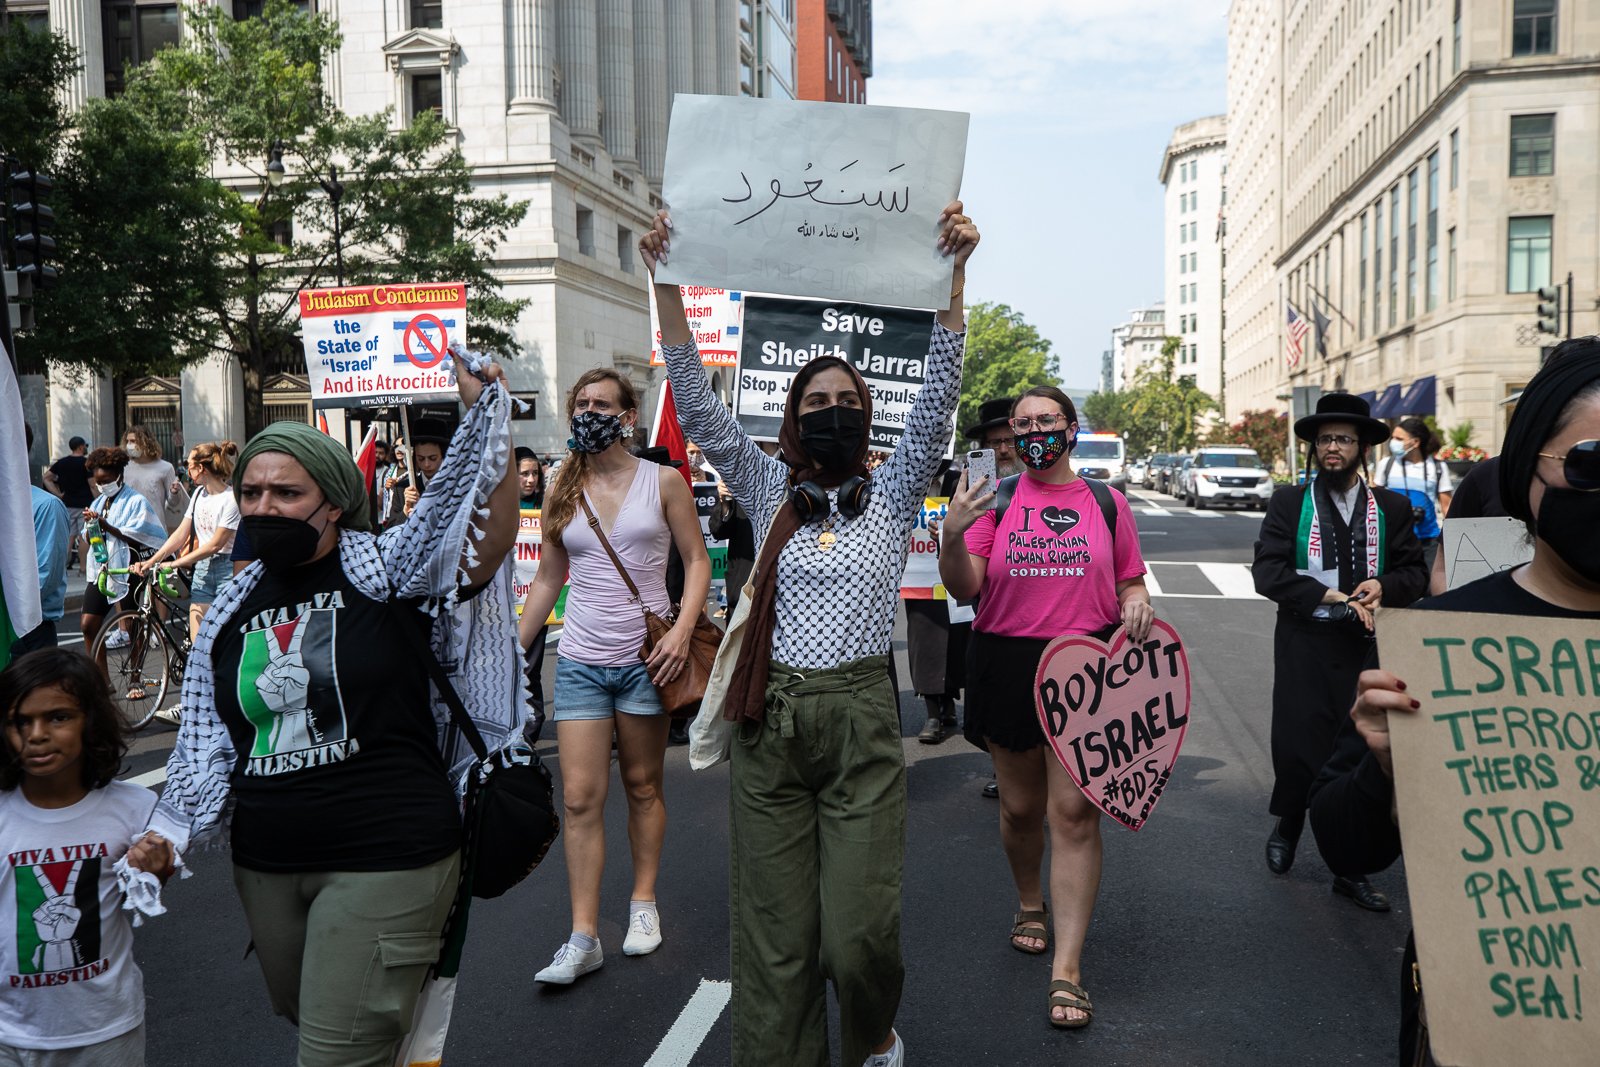 Demonstrators marched in protest of President Joe Biden's meeting with Israeli Prime Minister Naftali Bennett in Washington, D.C. on August 26, 2021. (Kaylee Greenlee - Daily Caller News Foundation)